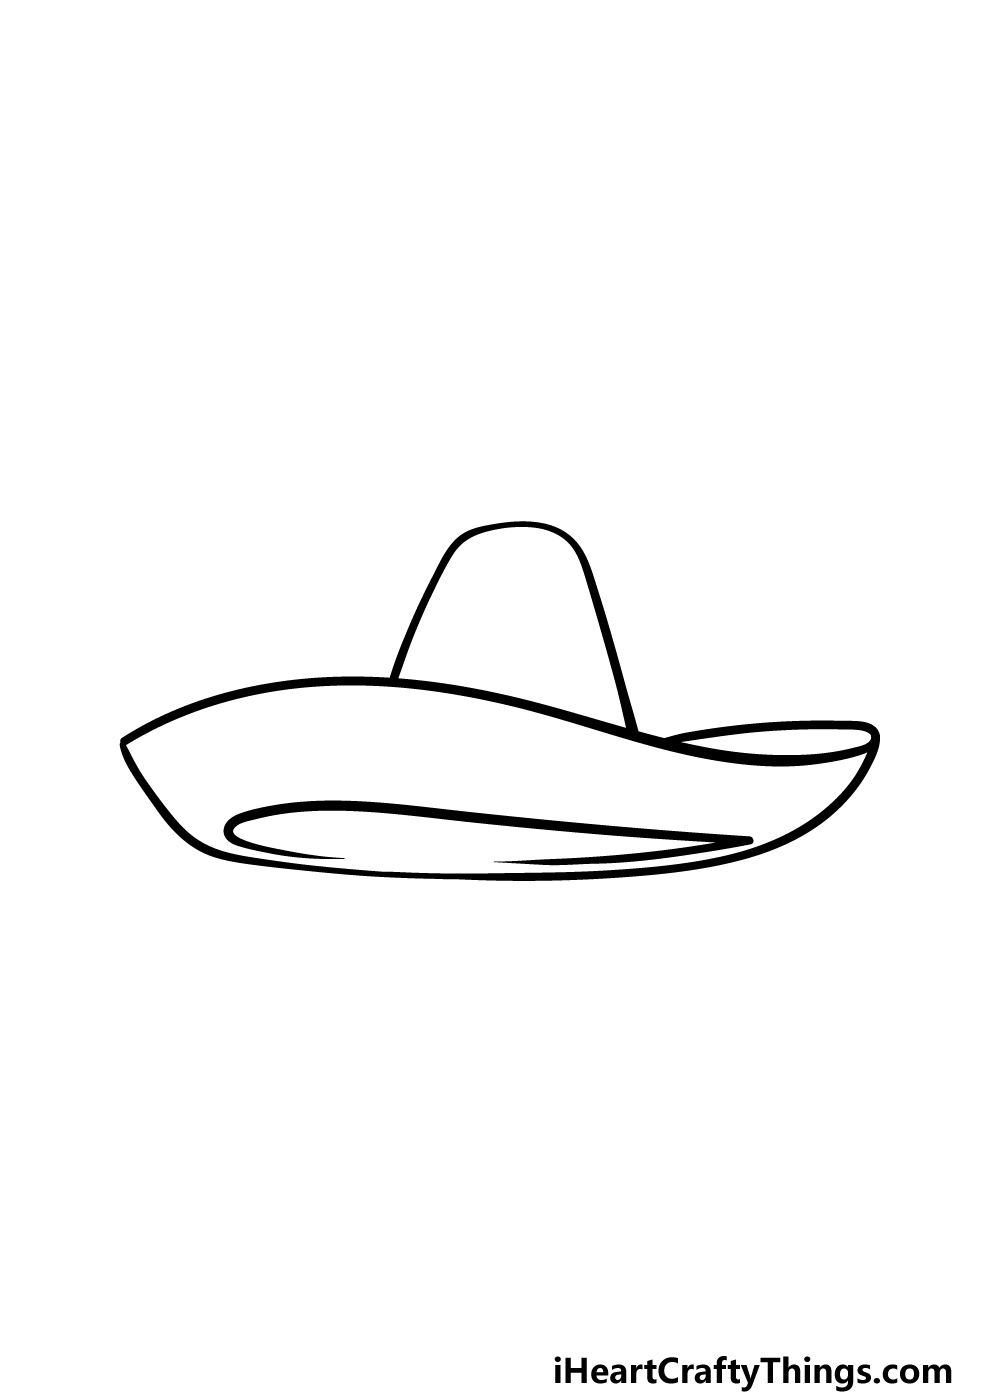 Sombrero Drawing - How To Draw A Step By Step